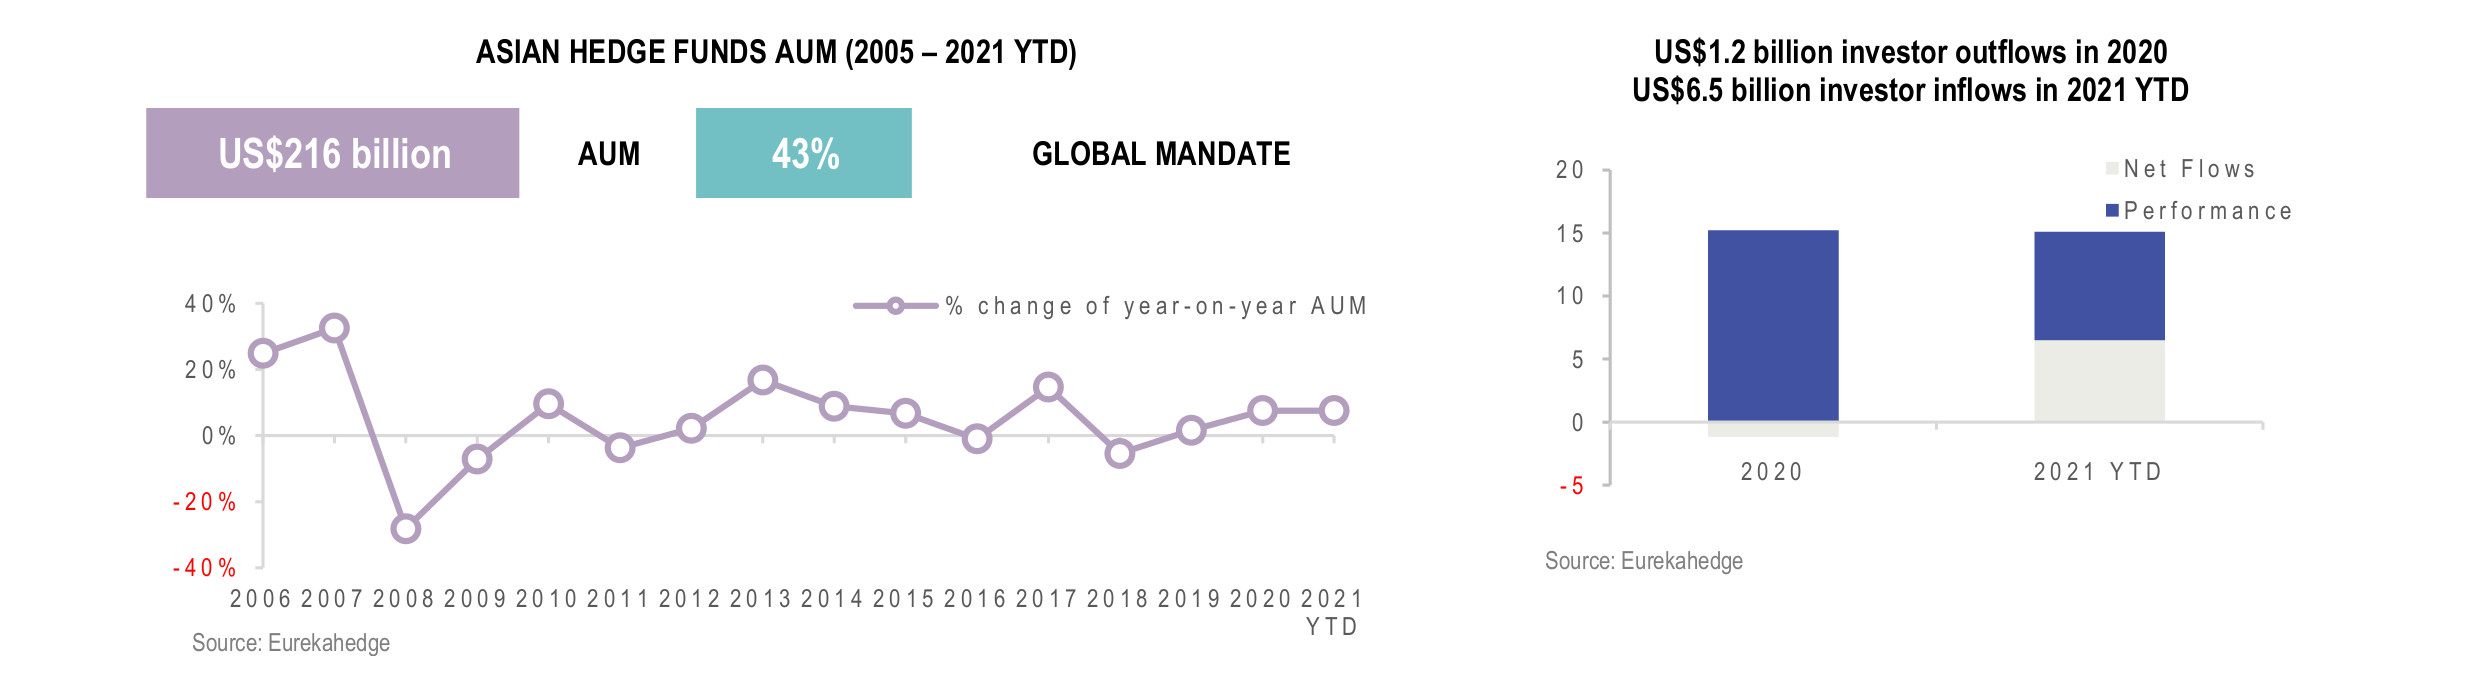 Asian Hedge Funds Infographic July 2021 - AUM